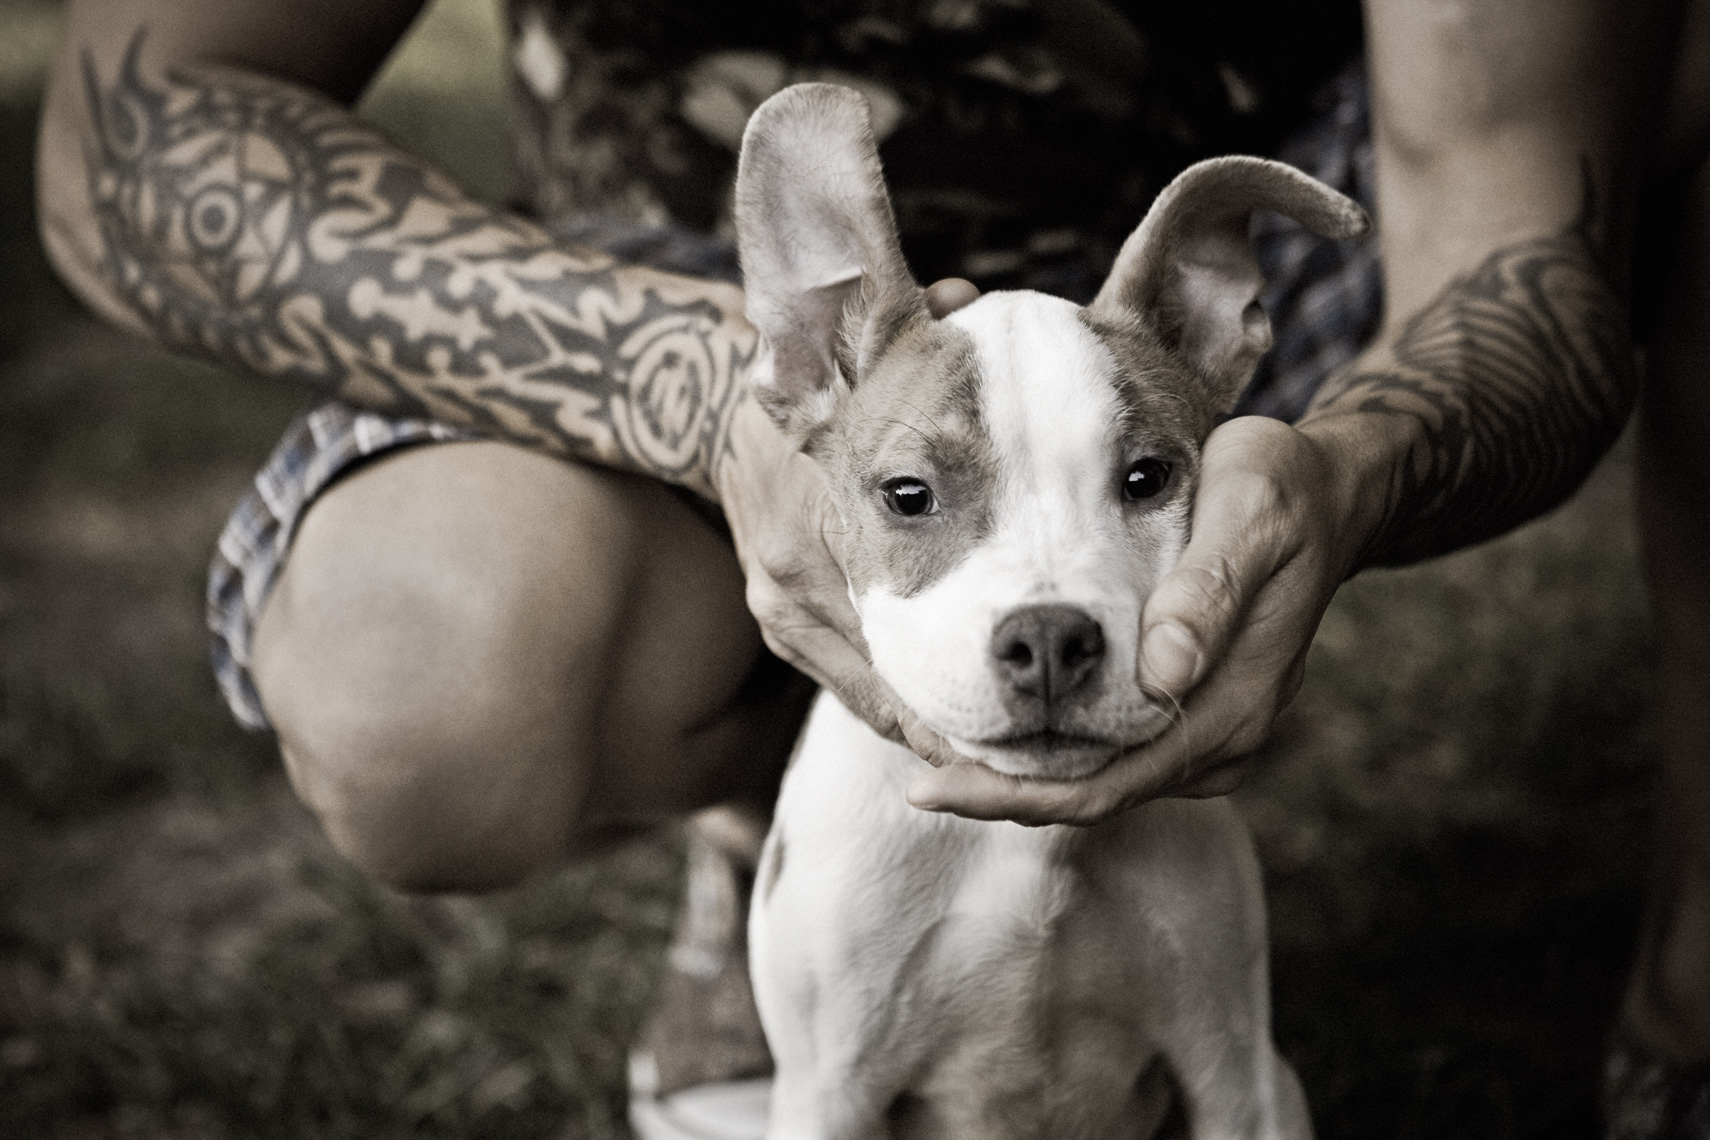 Los Angeles Dog Photography, Michael Brian, pets, cats, Tyson Kilmer holds Pit Bull puppy in hands, Dog Trainer